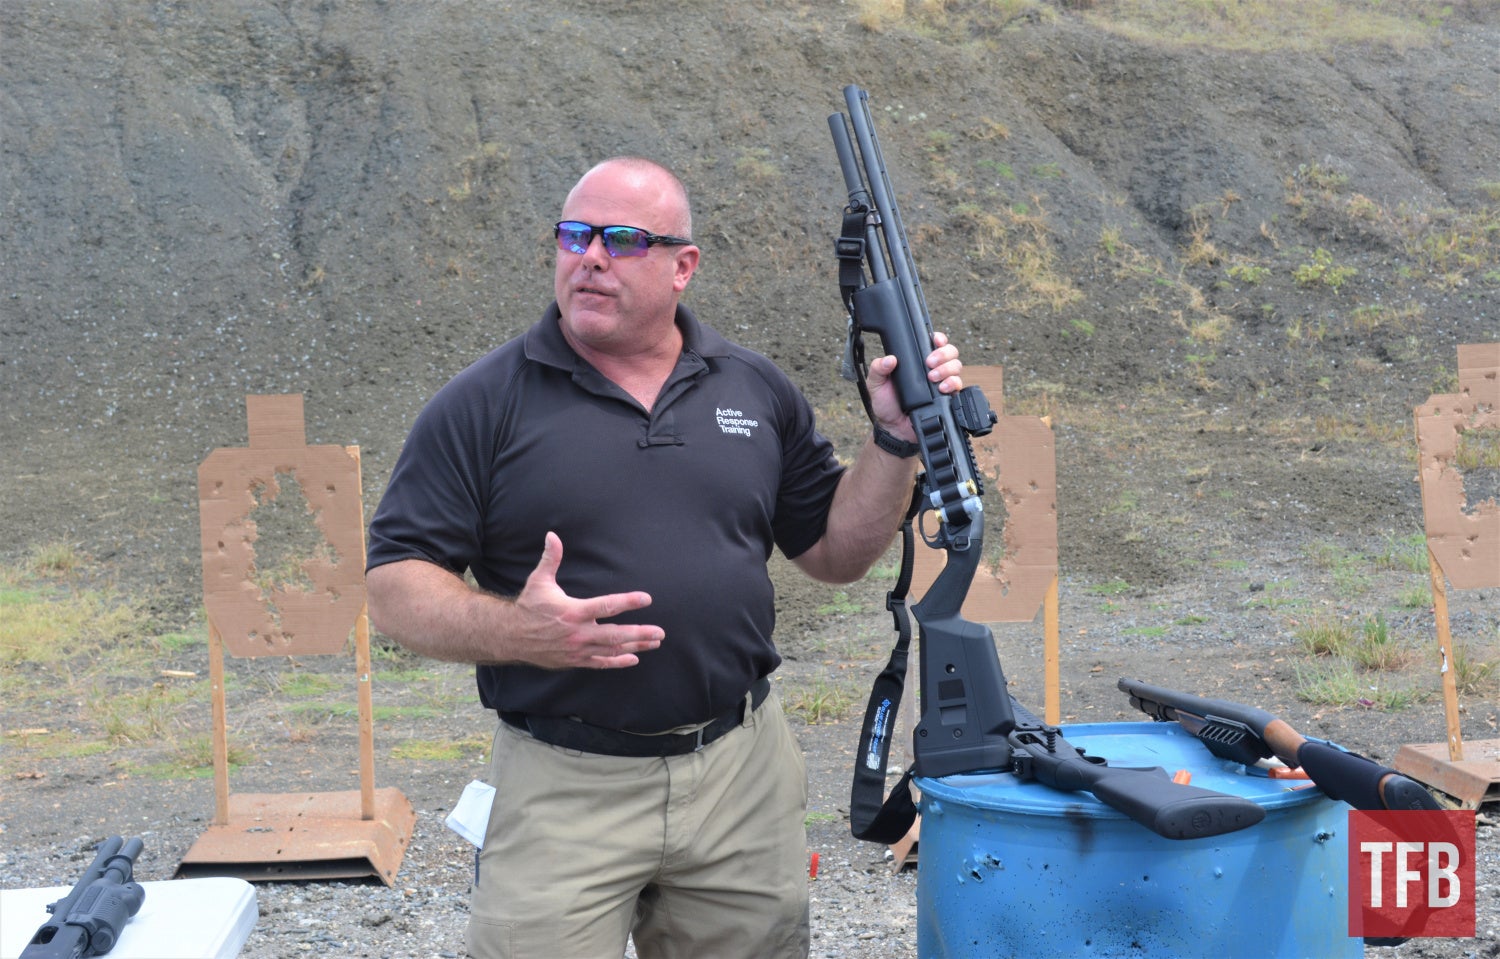 Active Response Training is led by Greg Ellifritz, a veteran instructor with decades of teaching and law enforcement experience.